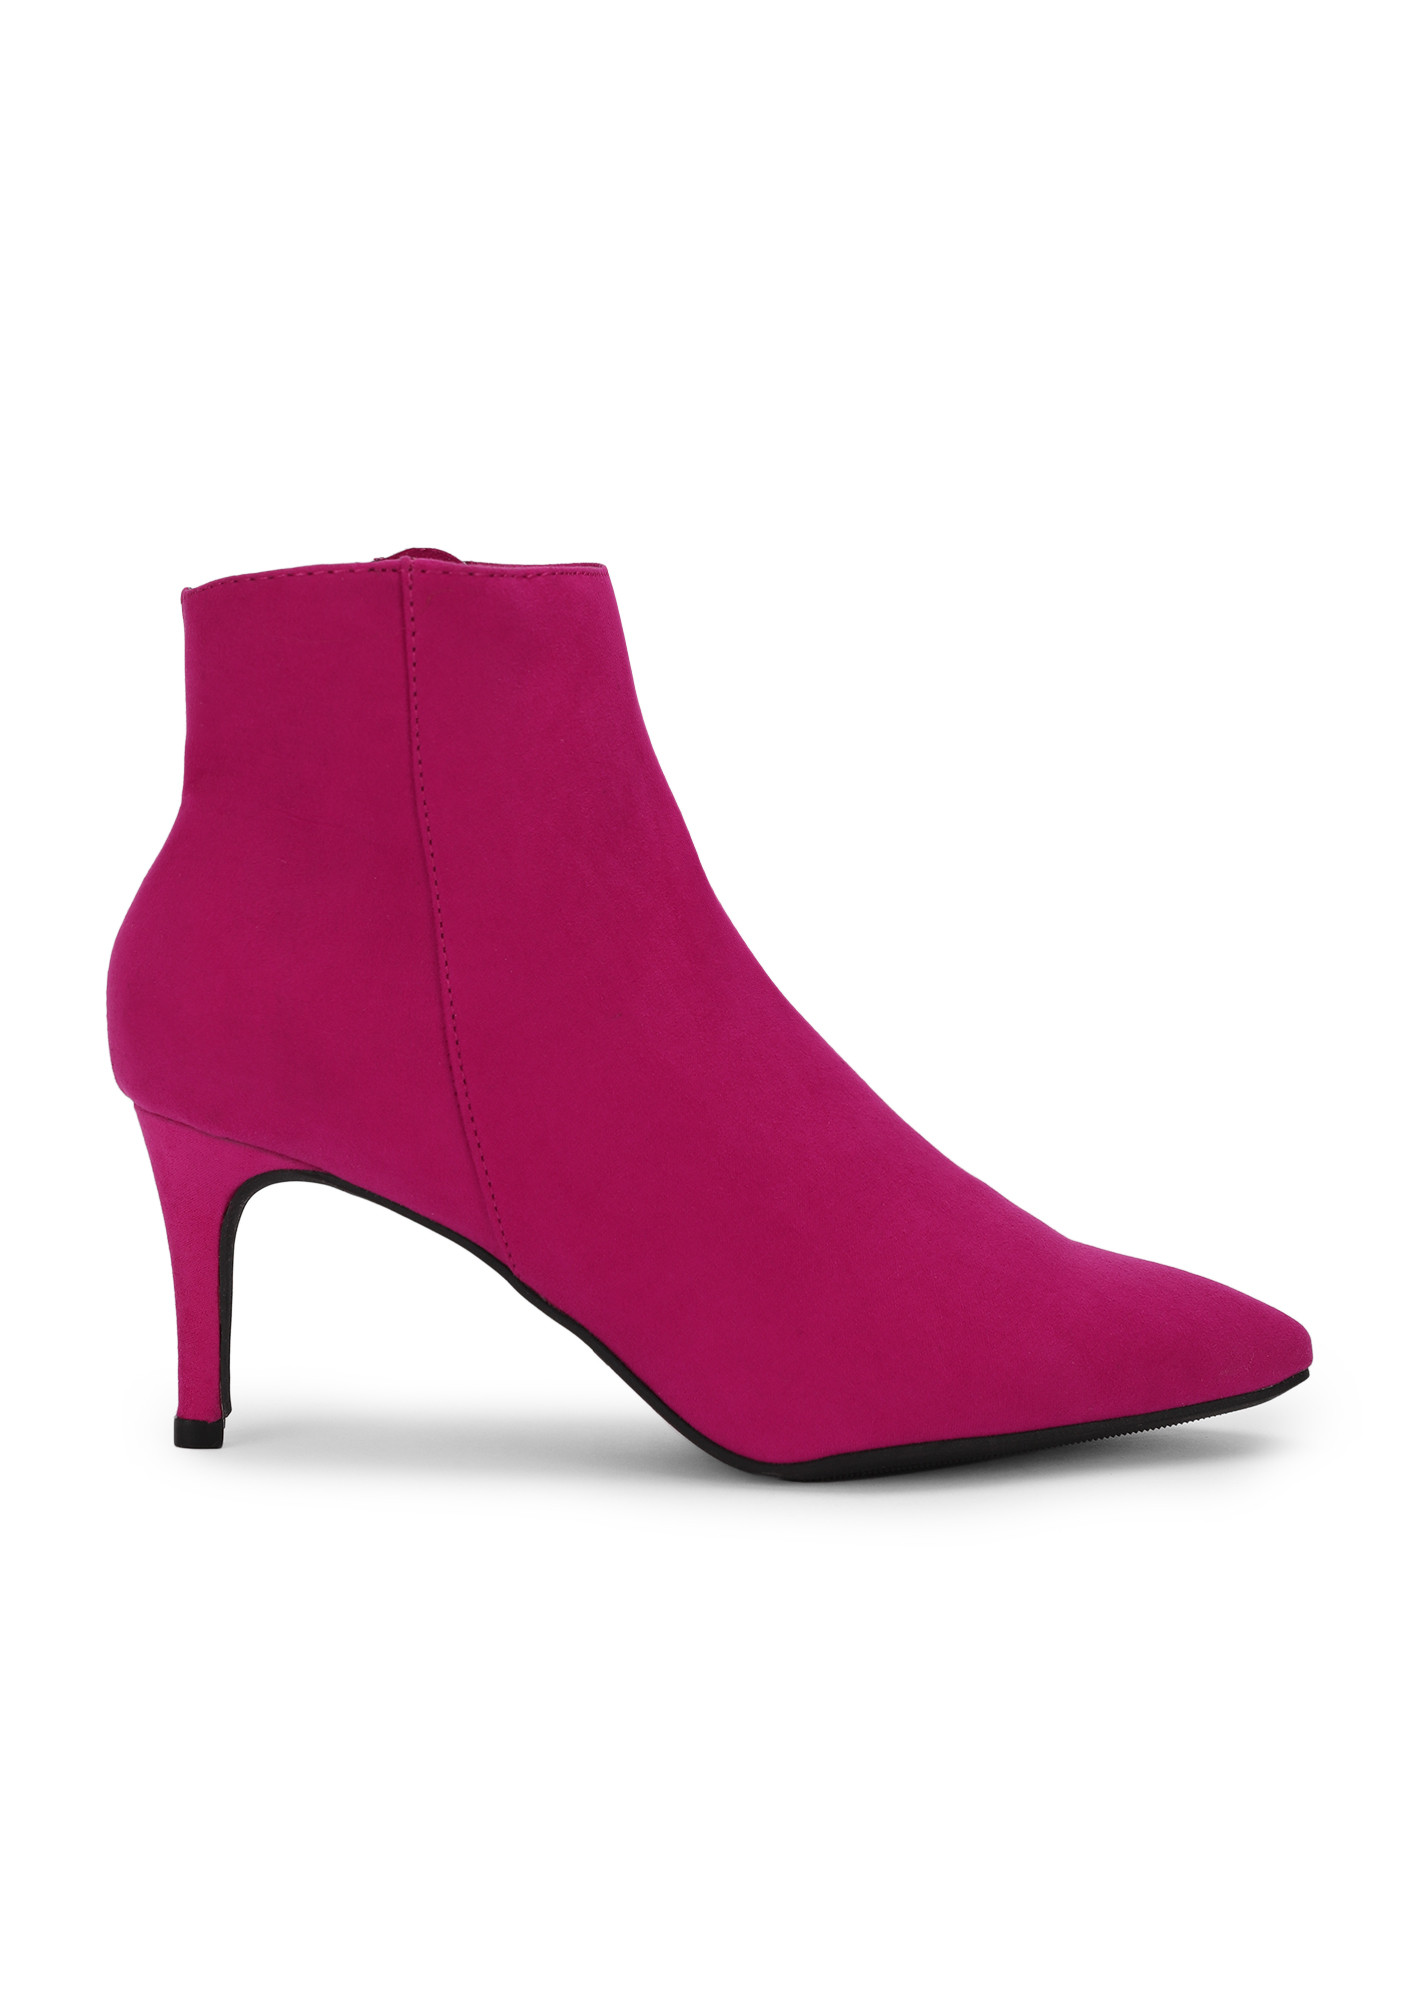 BOLD STEPS FUCHSIA ANKLE BOOTS